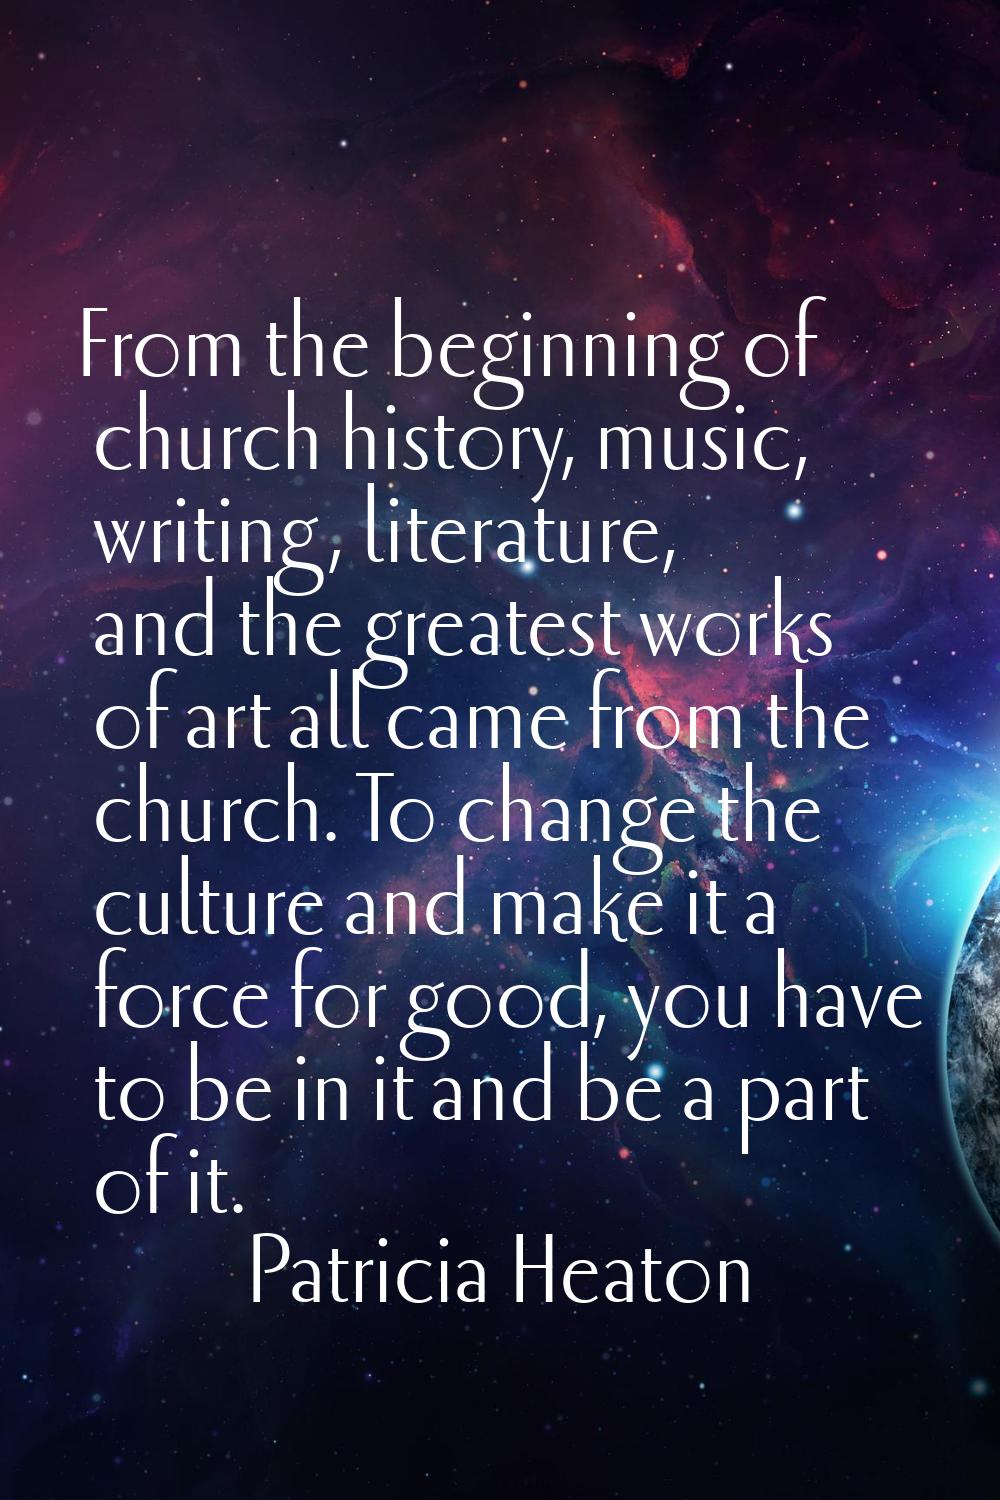 From the beginning of church history, music, writing, literature, and the greatest works of art all